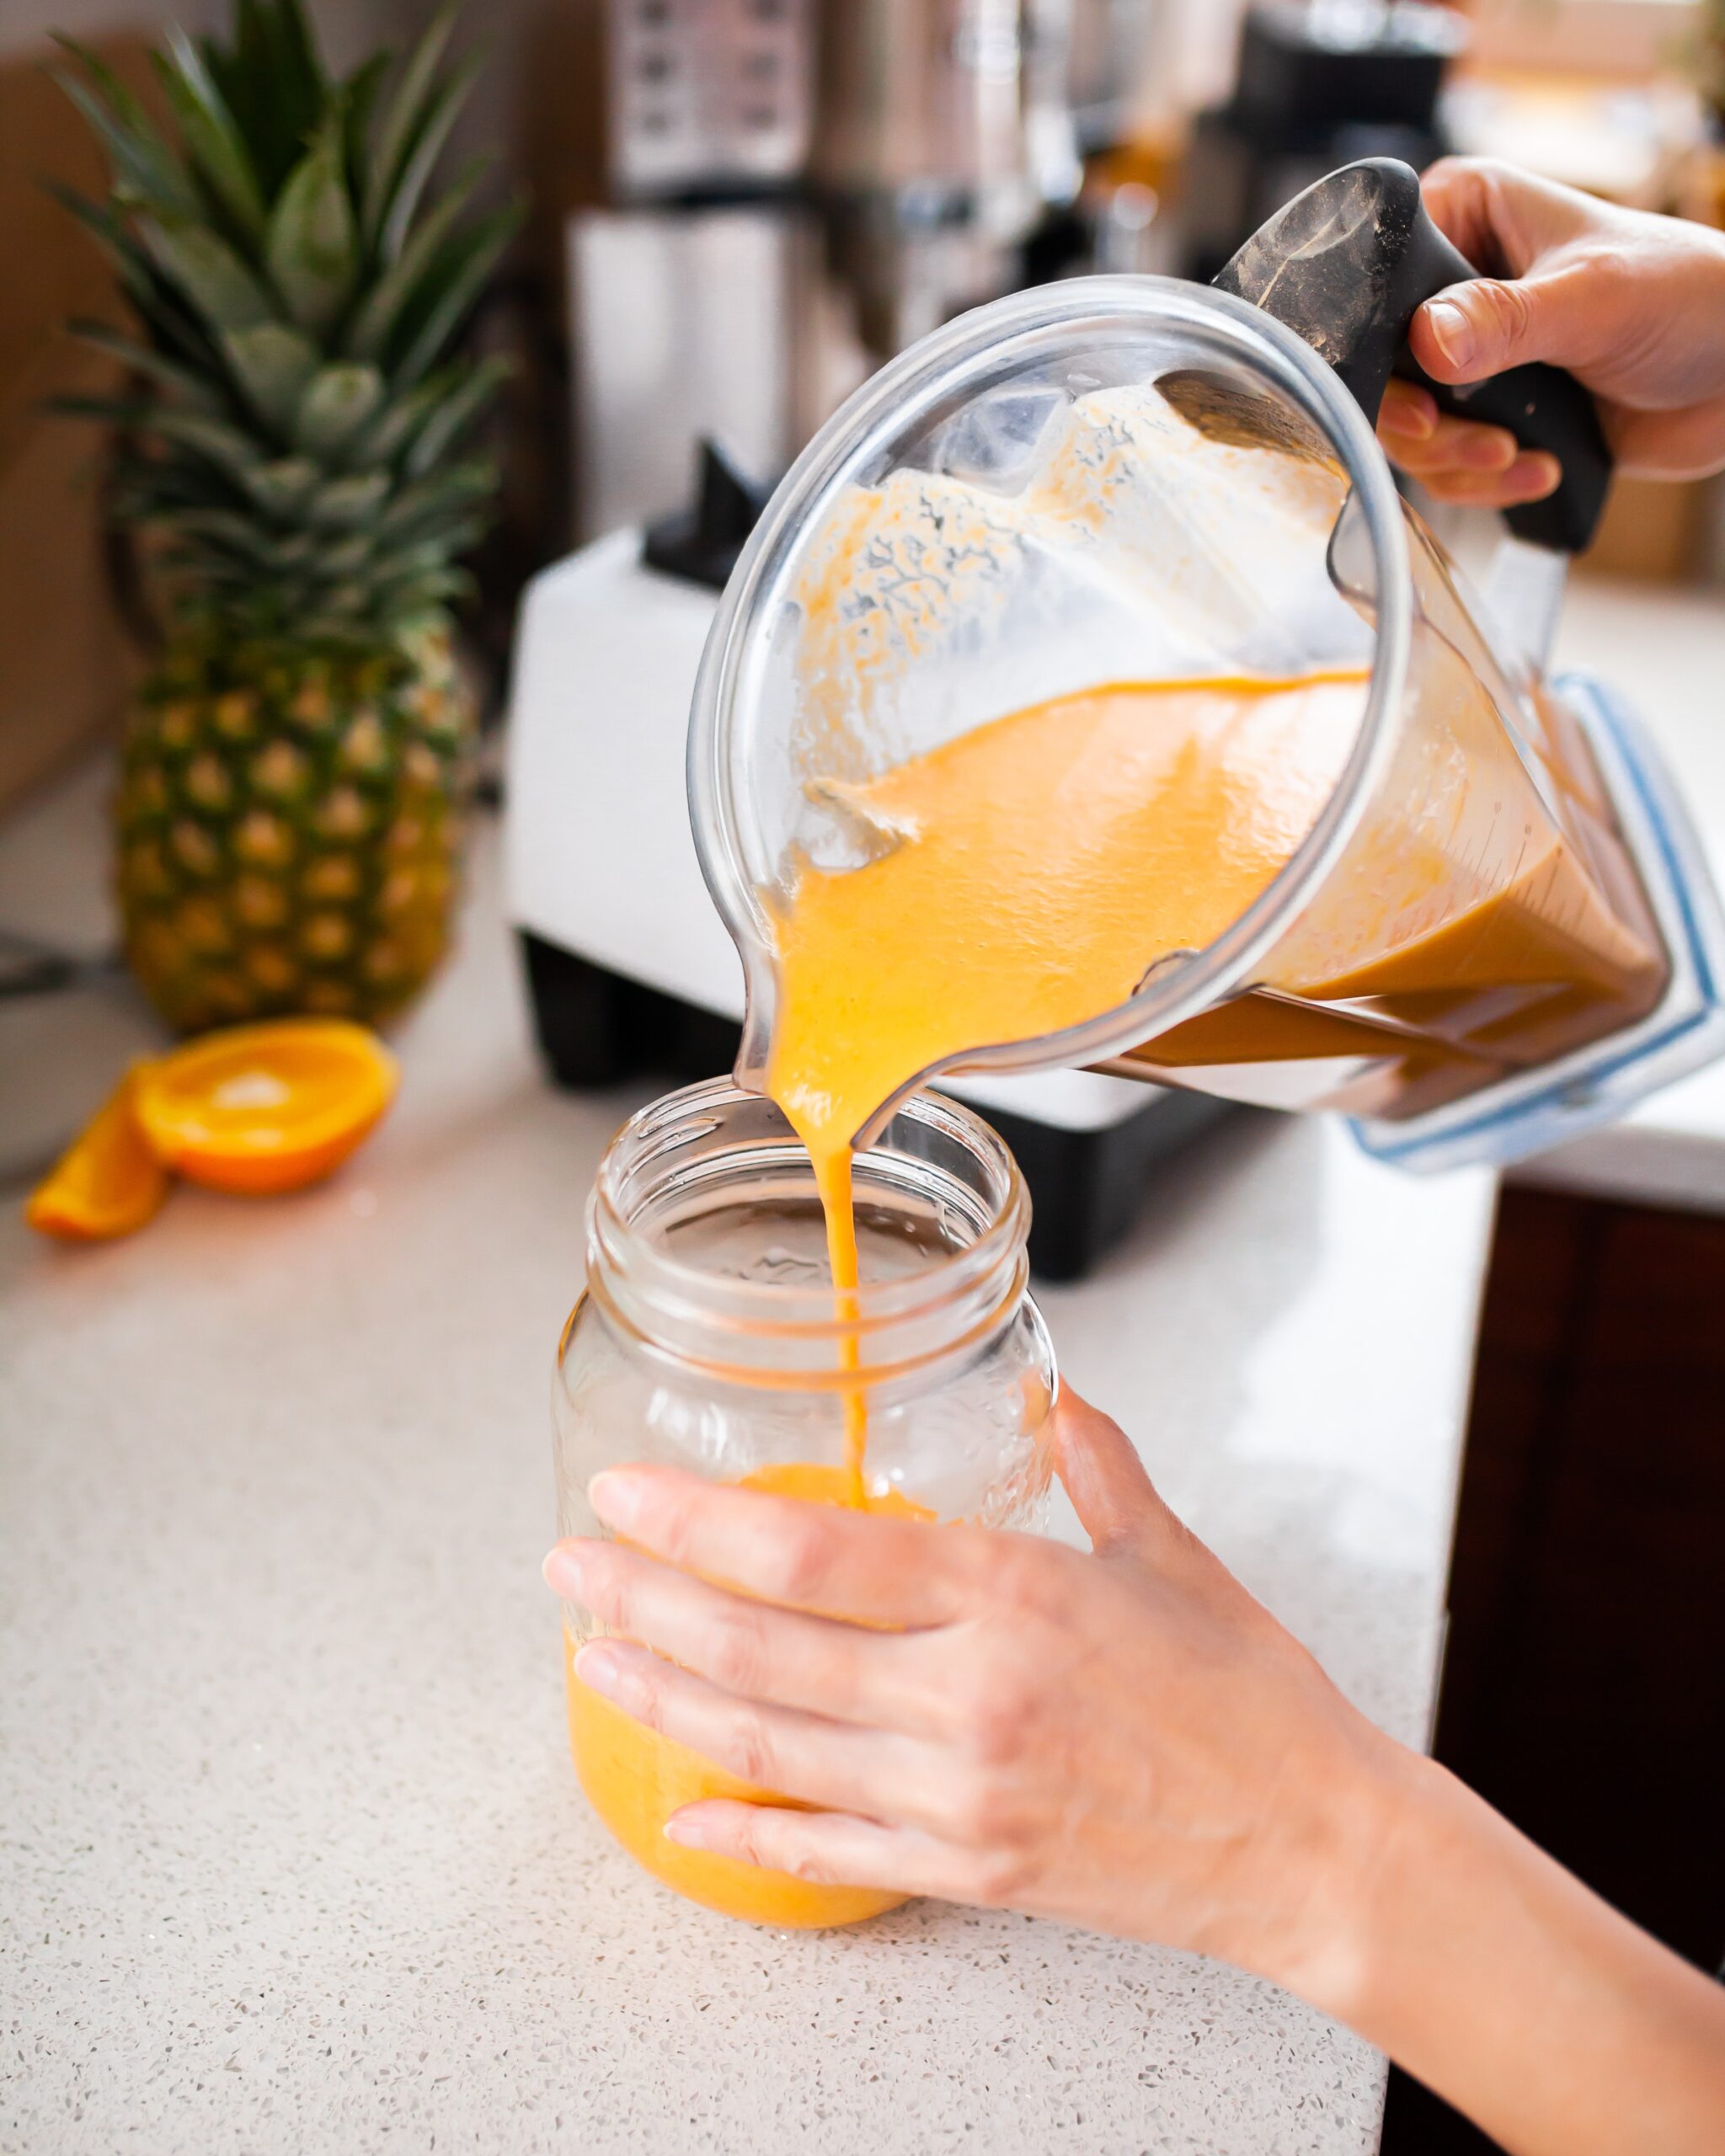 A yellow smoothie is being poured from a blender into a mason jar